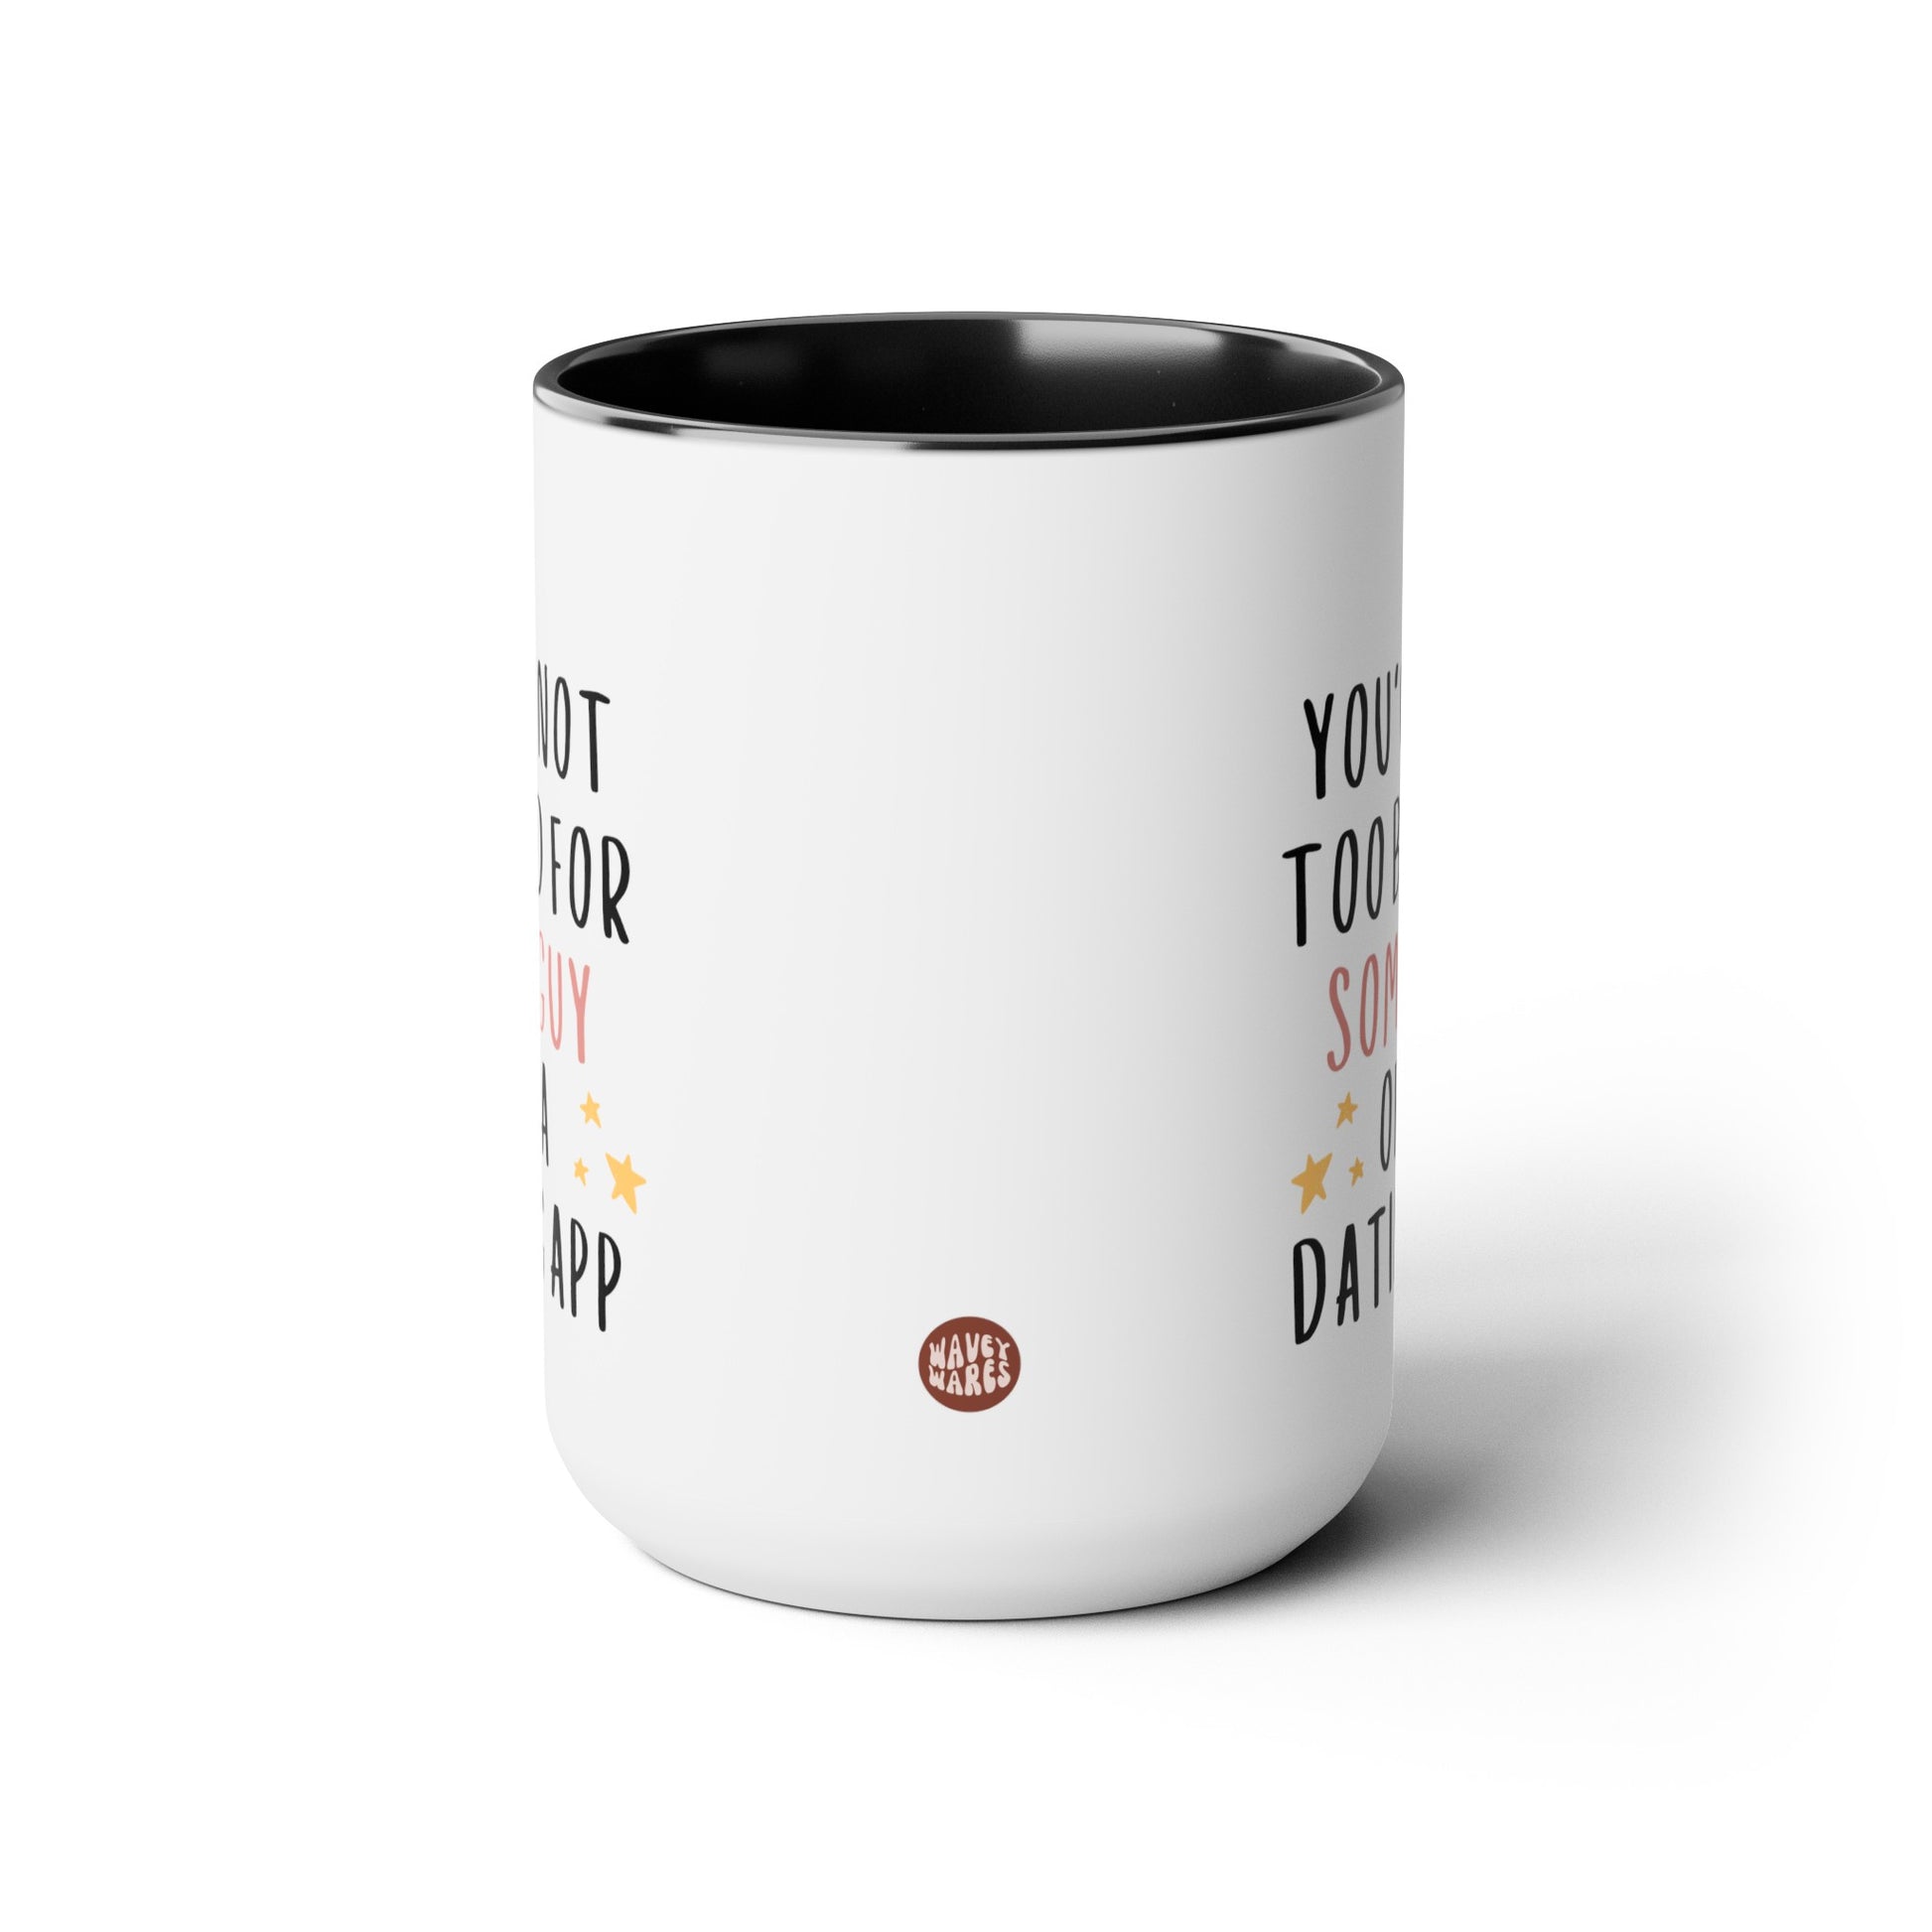 You're Not Too Bad For Some Guy Off A Dating App 15oz white with black accent funny large coffee mug gift for boyfriend valentine's day him husband fiance anniversary internet from girlfriend wife waveywares wavey wares wavywares wavy wares side